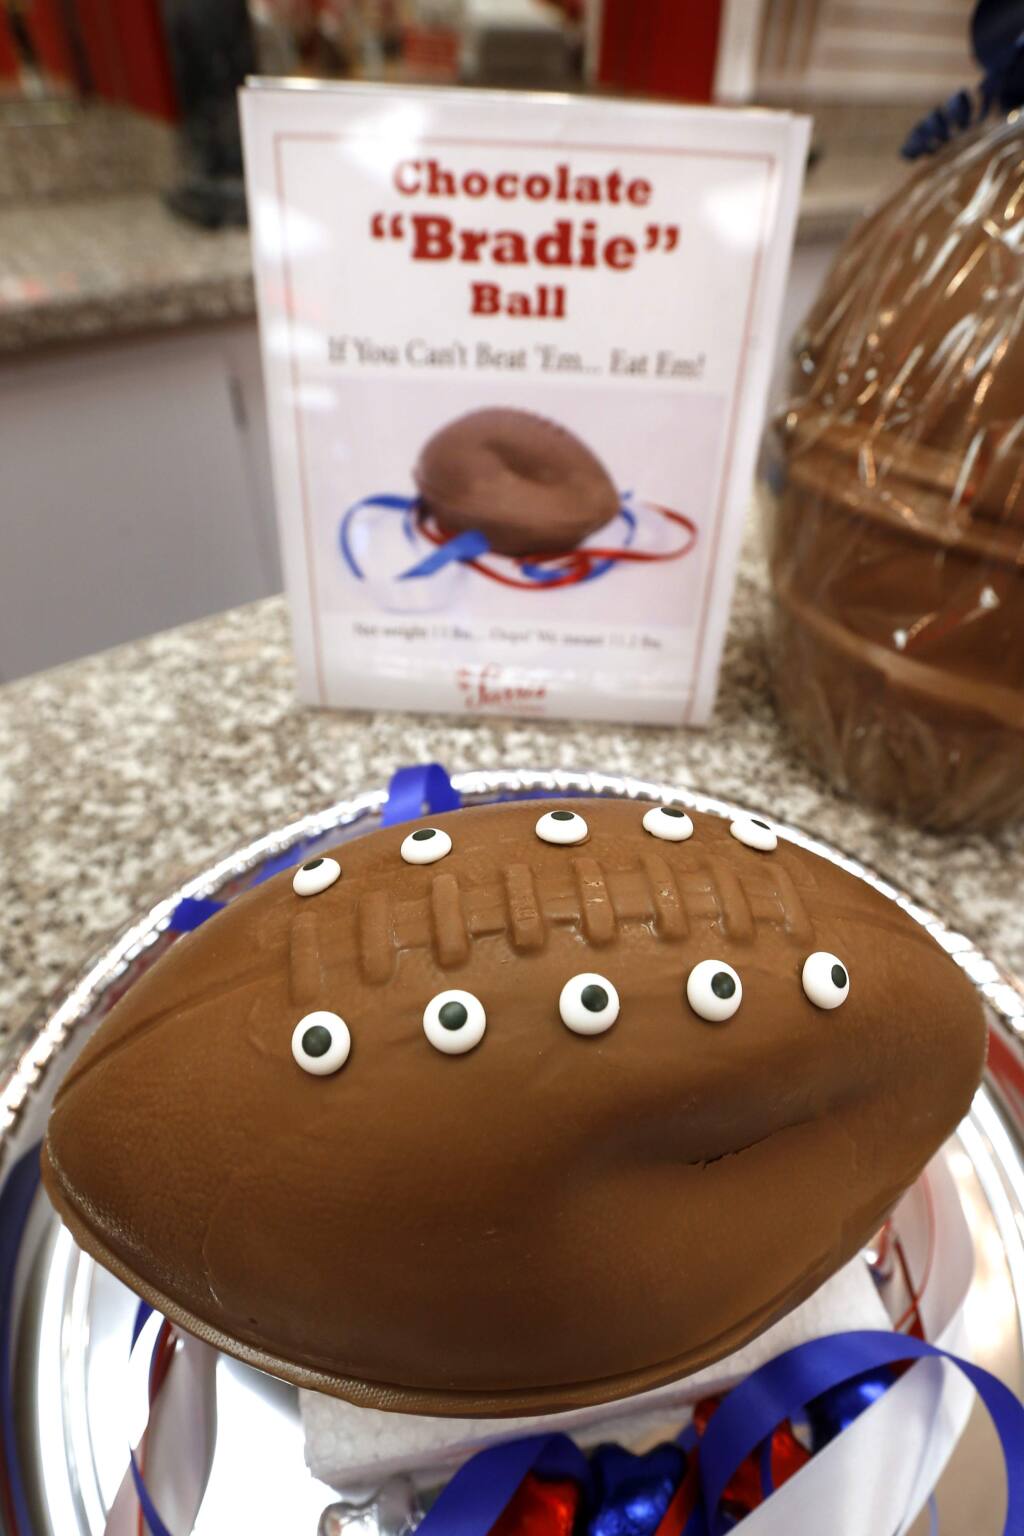 A 'deflated' chocolate football called a 'Bradie' Ball is on display at Sarris Candy store in in Canonsburg, Pa., on Wednesday, Jan. 28, 2015. Owner Bill Sarris says they came up with the idea to poke fun at the controversy surrounding under-inflated footballs on Tuesday. The display item isn't for sale. (AP Photo/Keith Srakocic)